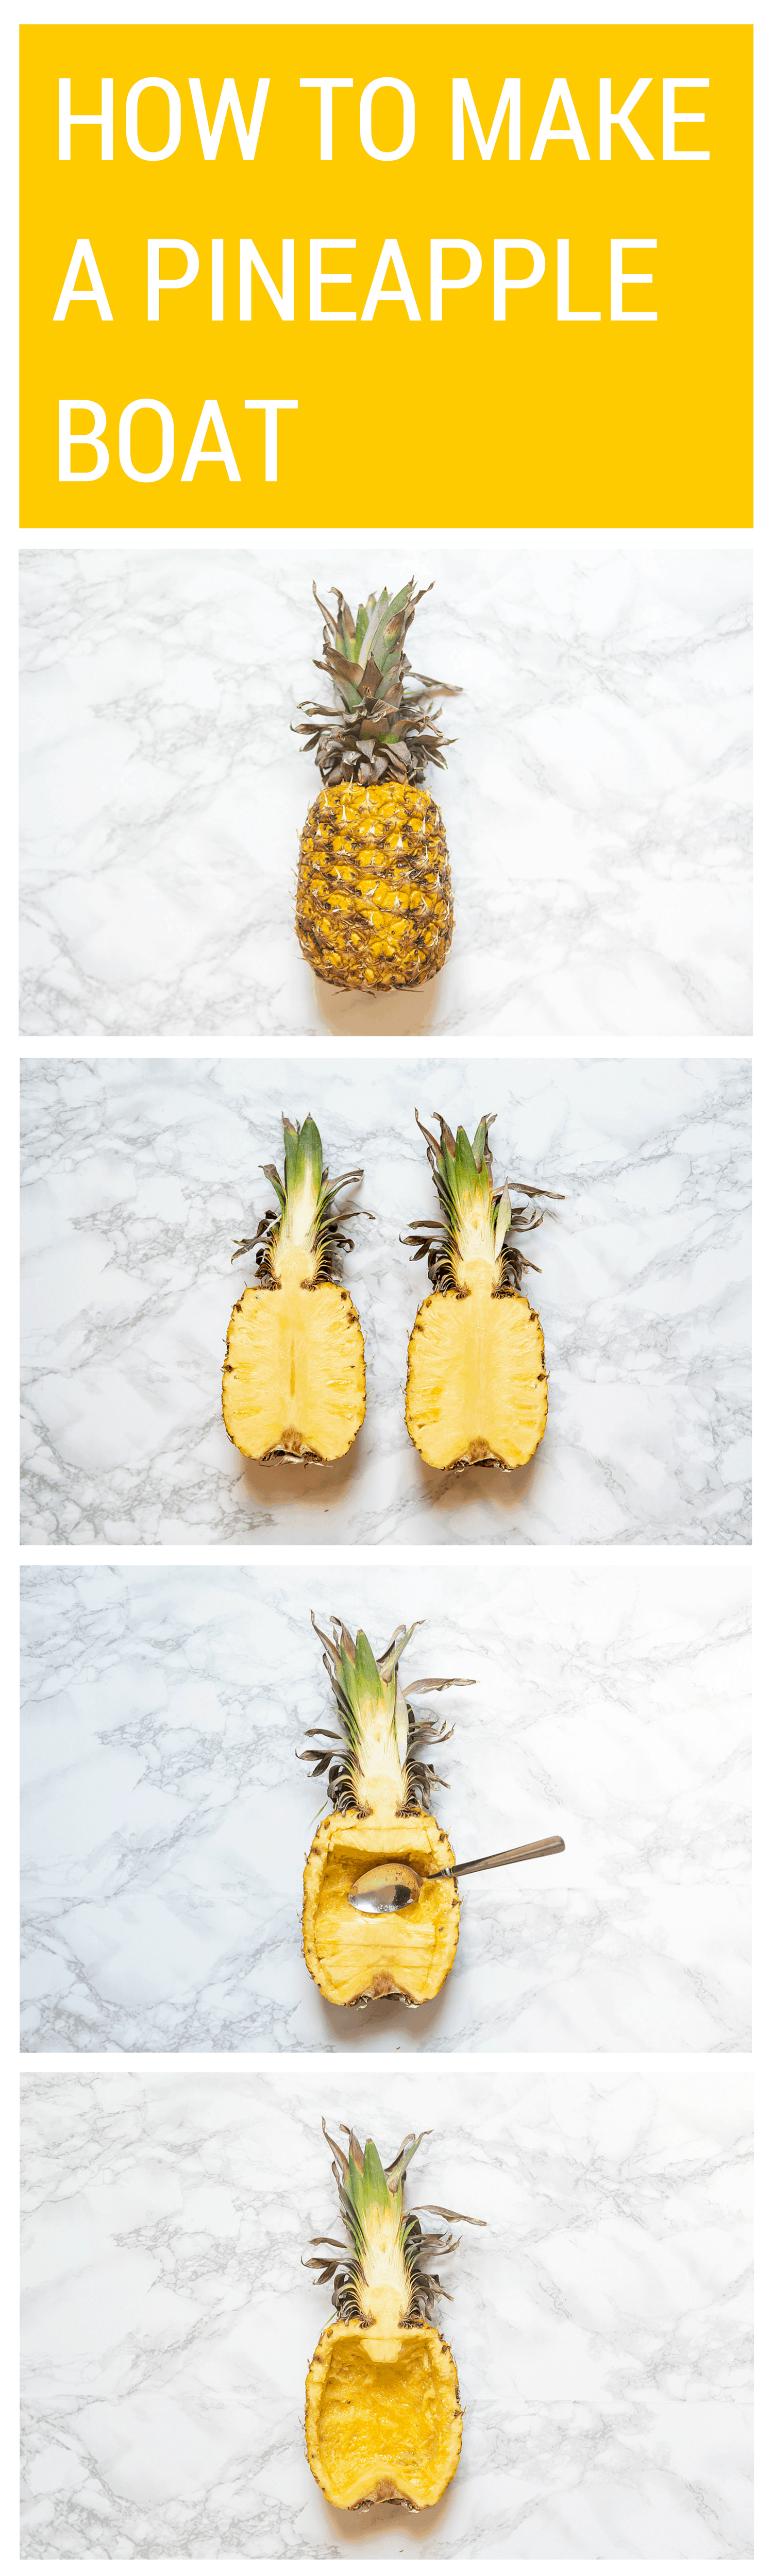 How To Make A Pineapple Boat